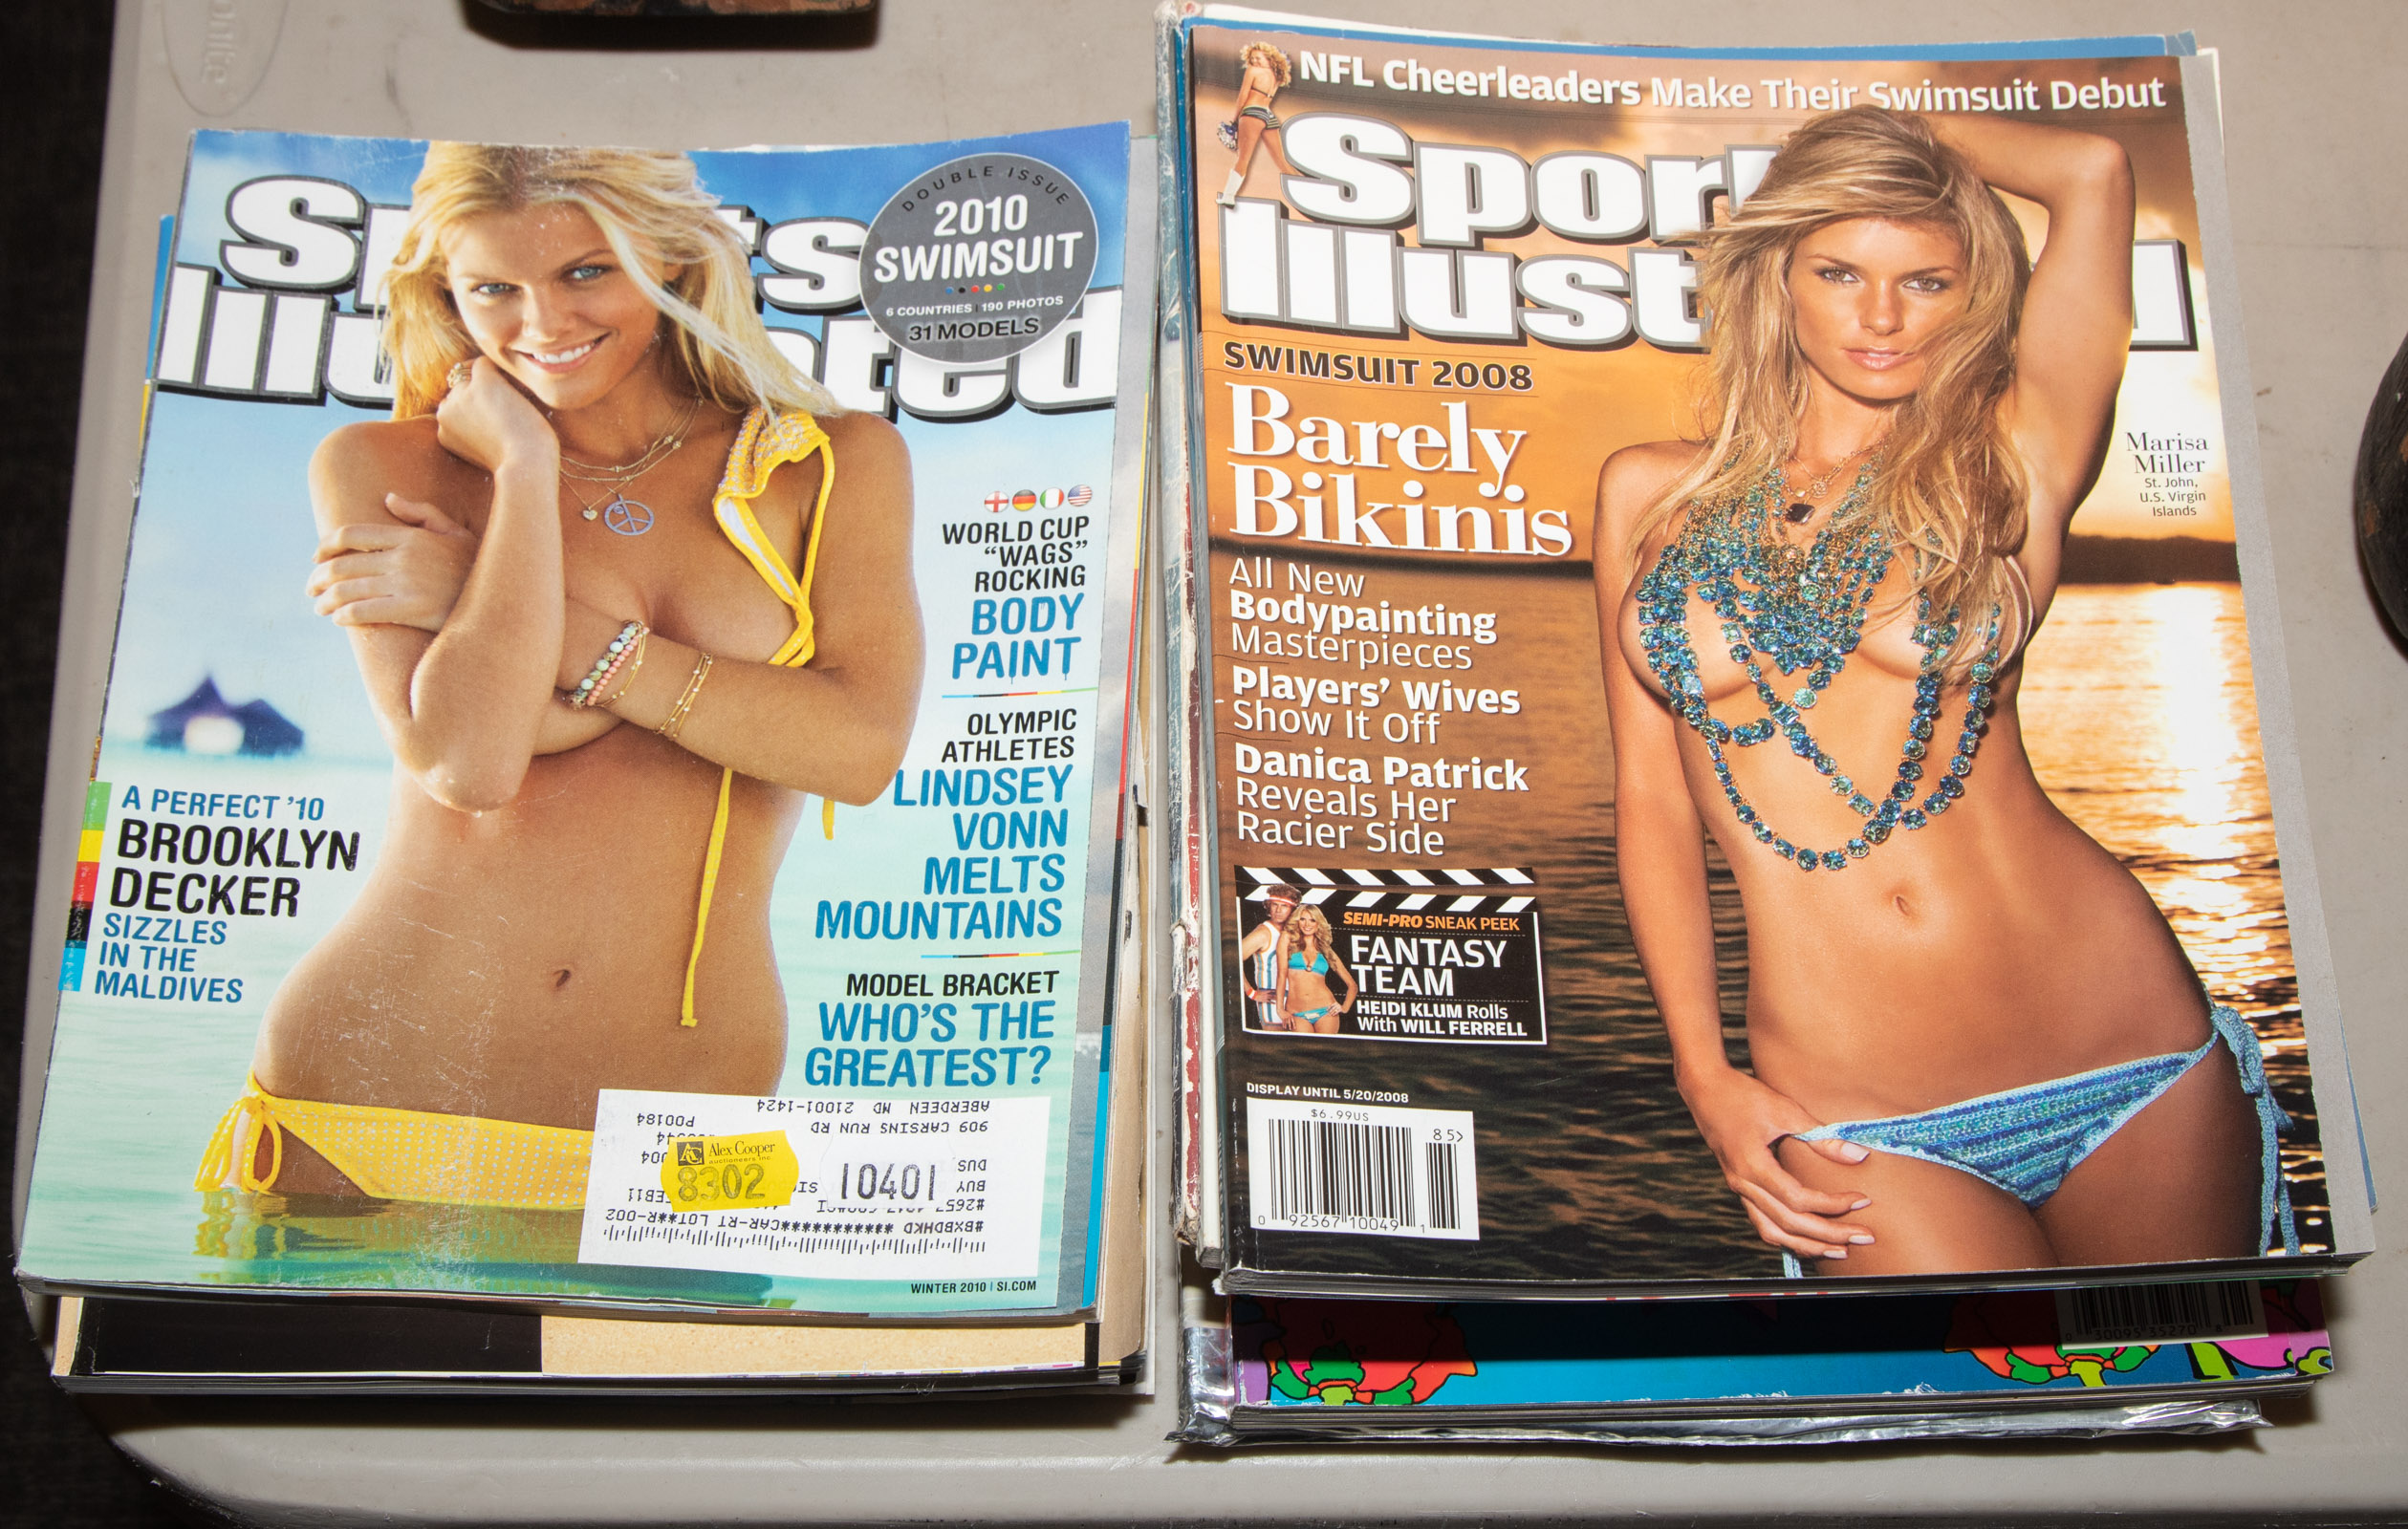 SPORTS ILLUSTRATED SWIM SUIT ISSUES  28855e